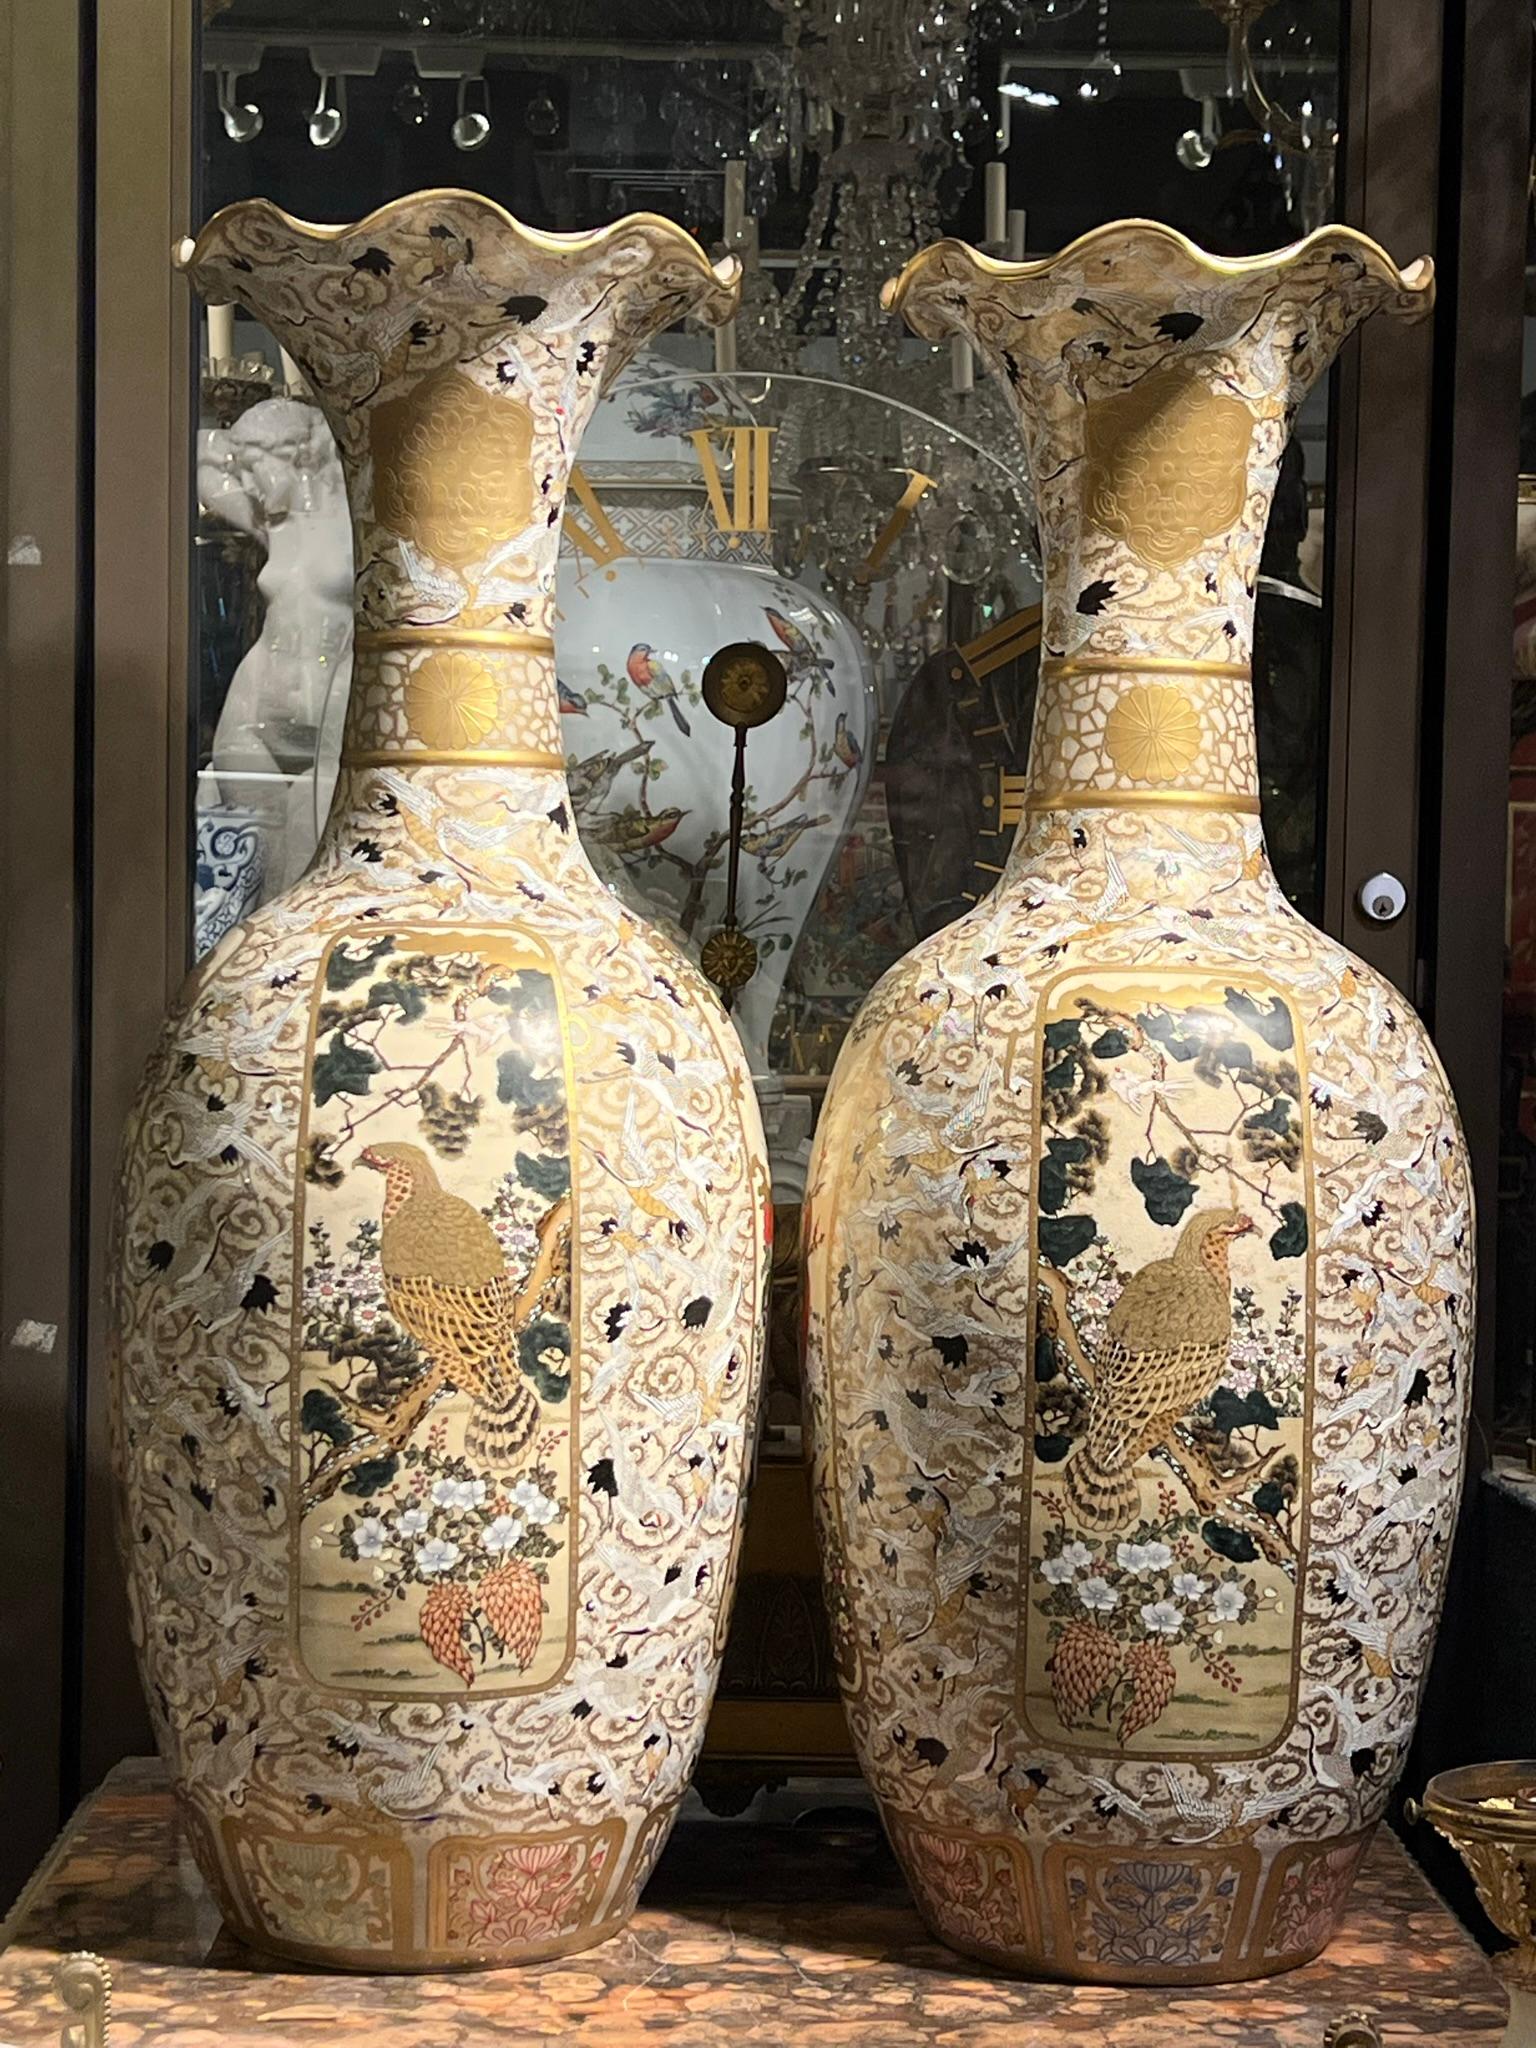 Pair of finest quality Japanese Palace size Meiji period satsuma vases hand painted and Enameled with Cranes and various birds and flowers.